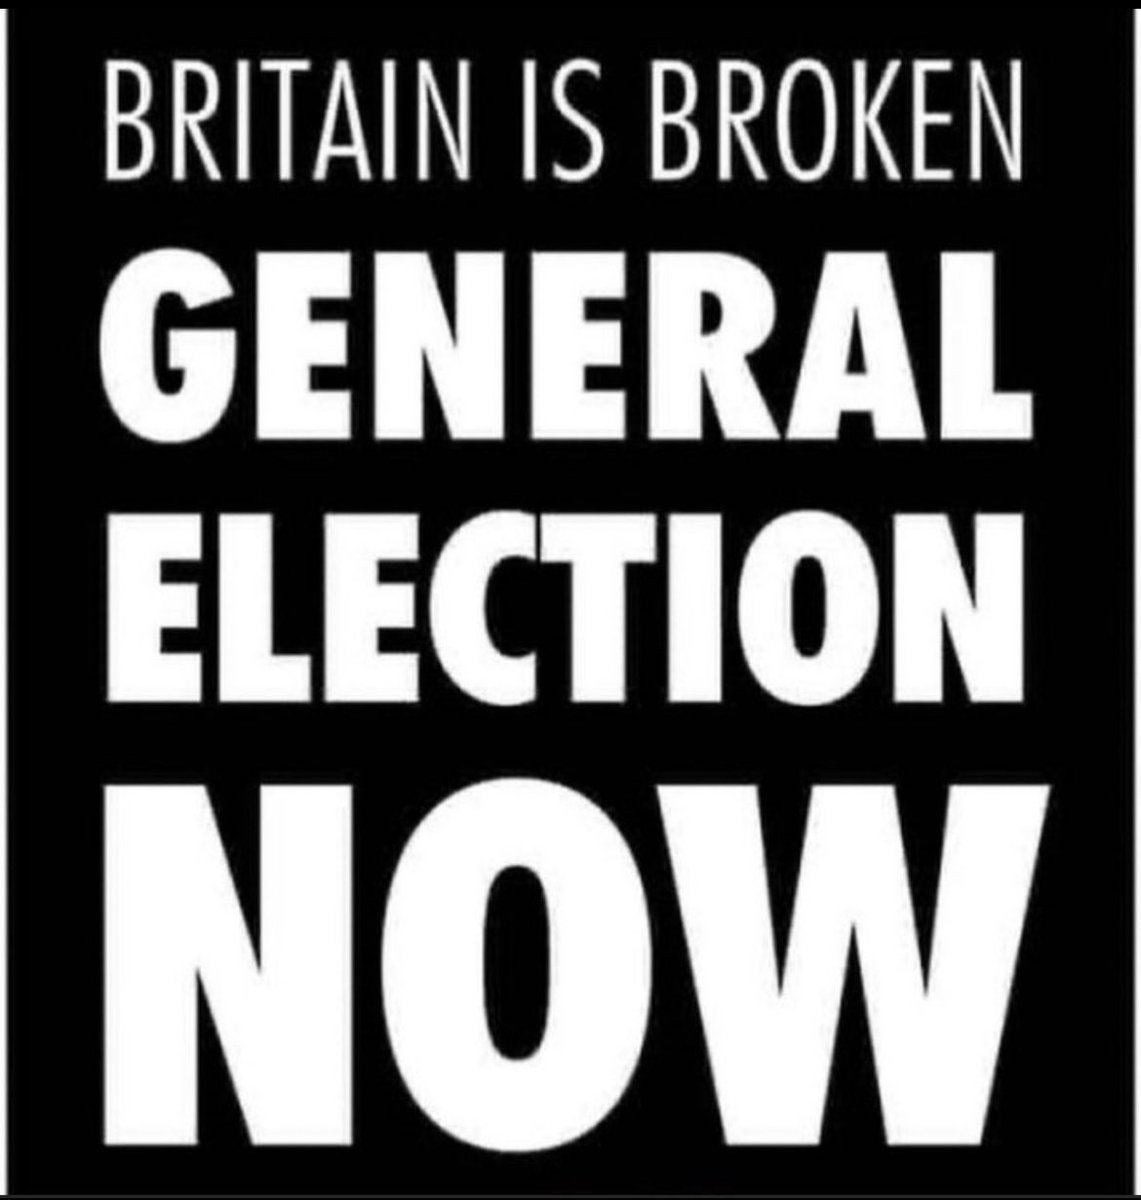 Labour is ready for a general election, the voters are ready for a general election. The only person who isn’t ready is Rishi Sunak, squatting in Number 10 without a mandate.Tories so scared of holding the election.causeDead and gone Tory scumbags will be annihilated at election